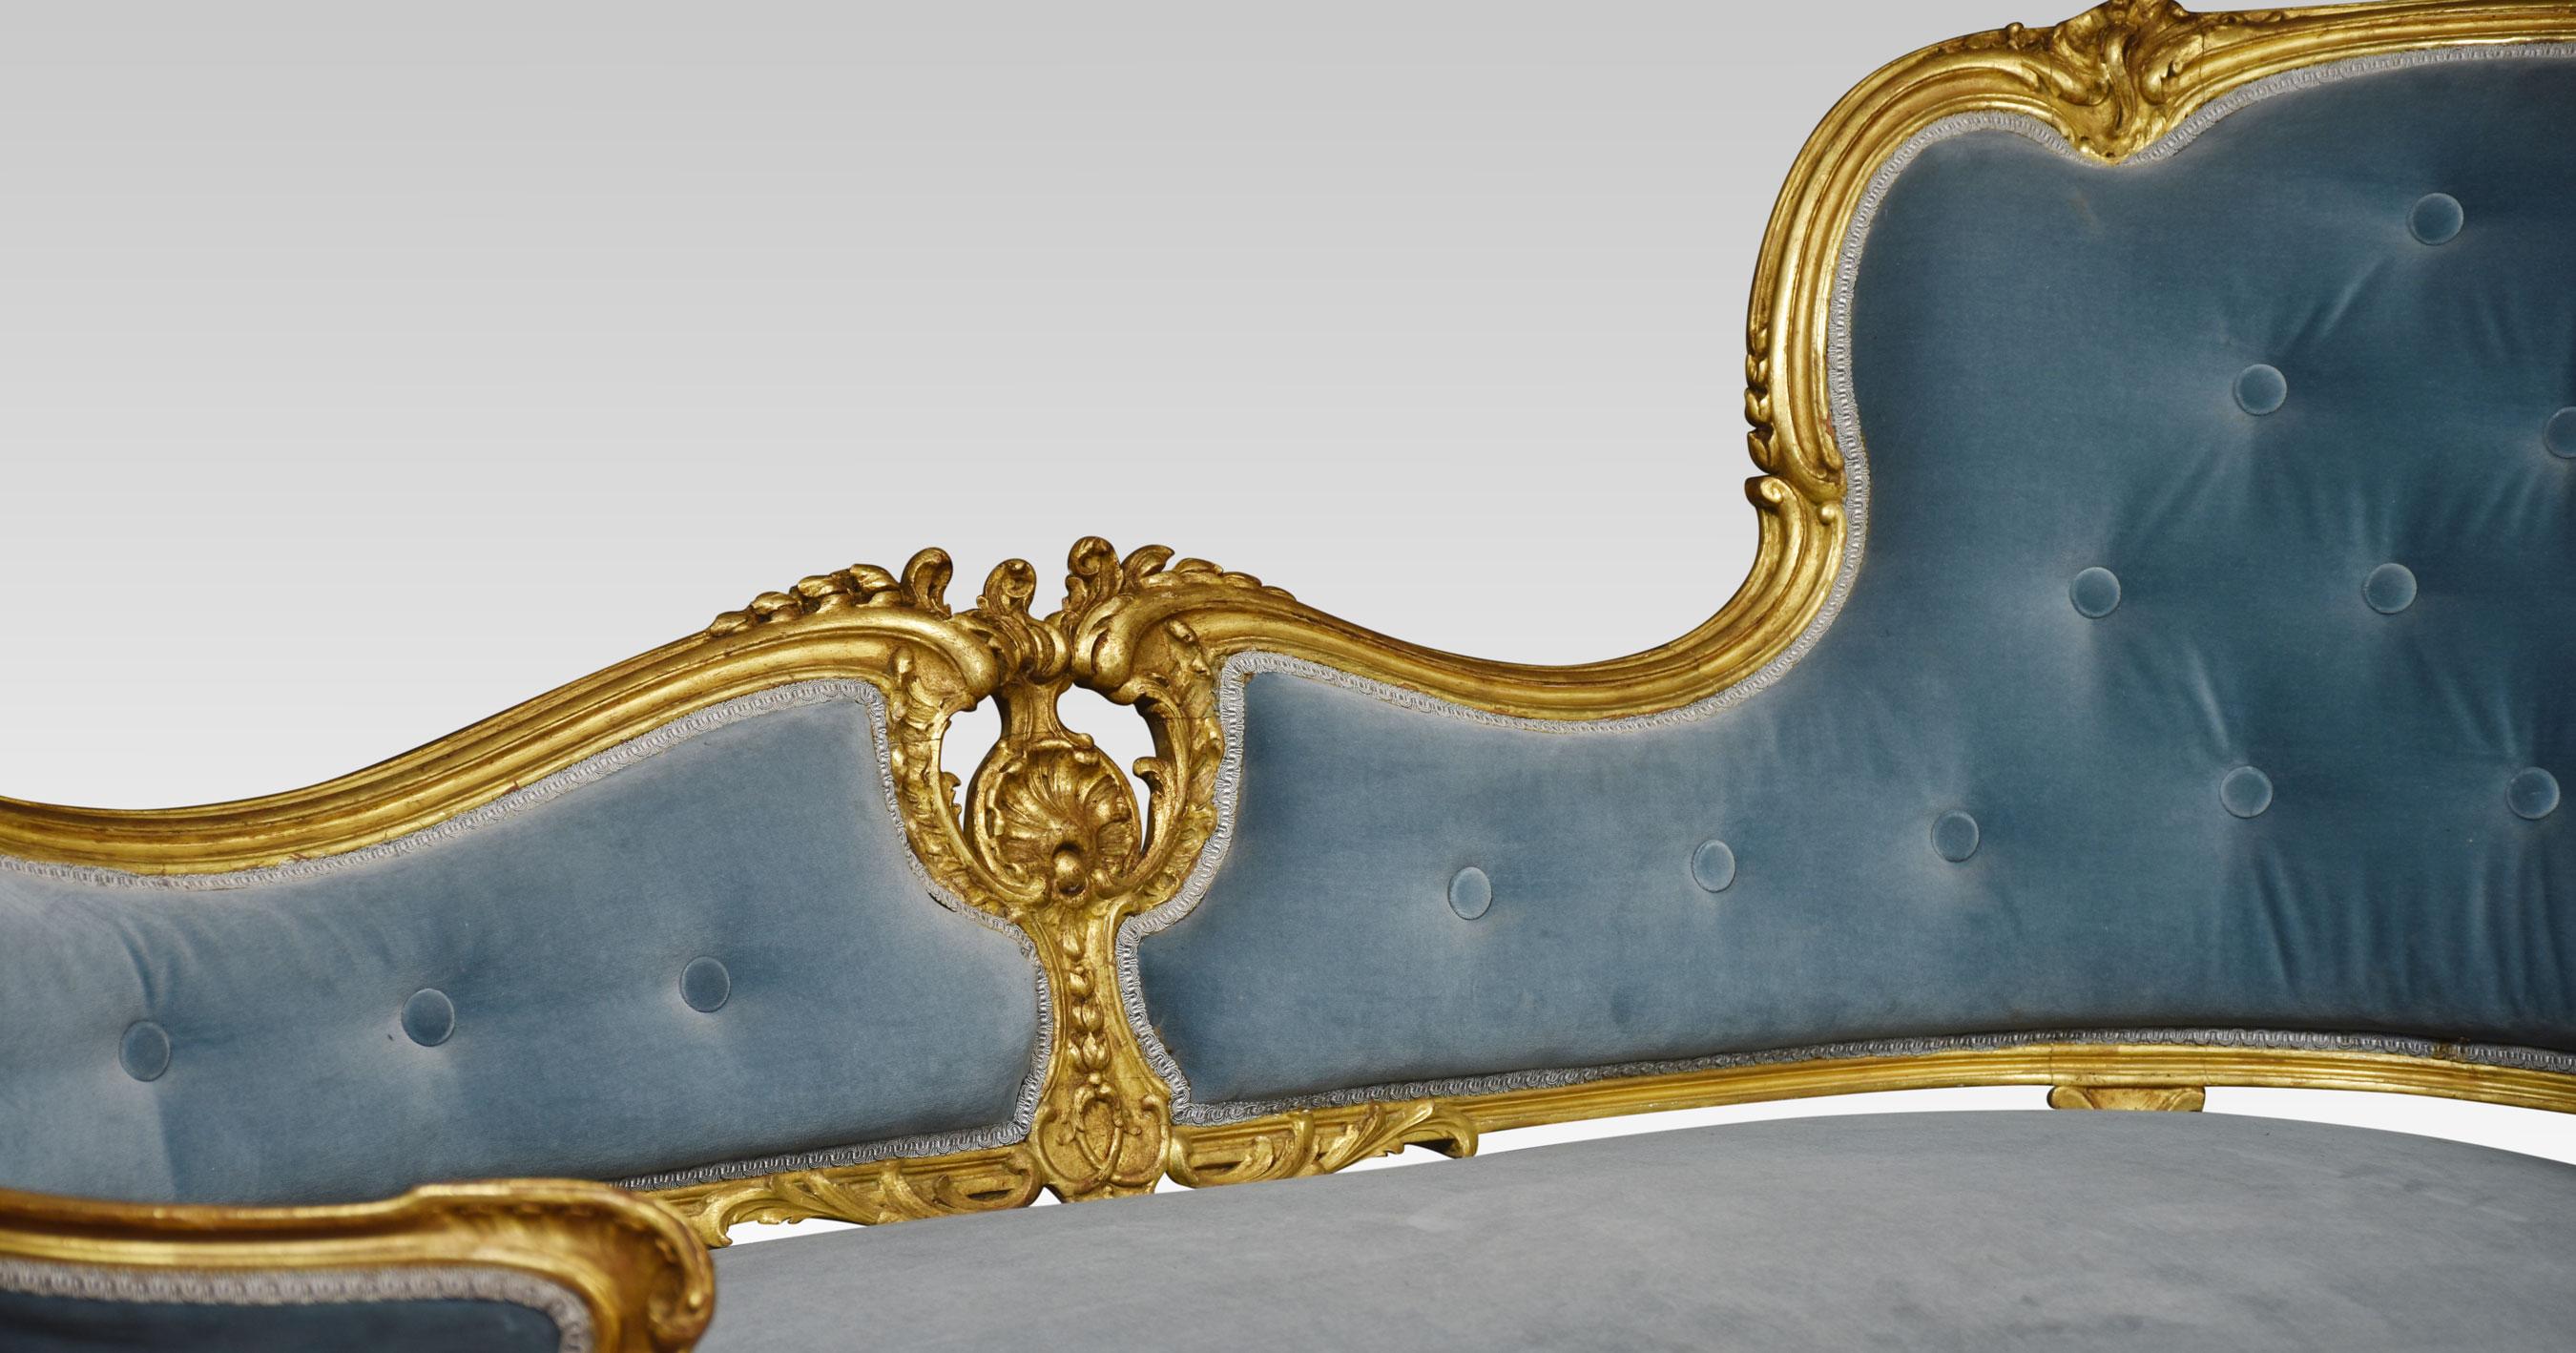 Giltwood chaise lounge, the carved moulded back rail with pierced scrolling decoration, to the deep buttoned back upholstered in light blue velvet upholstery. All raised up on cabriole legs terminating in scrolling toes.
Dimensions
Height 32